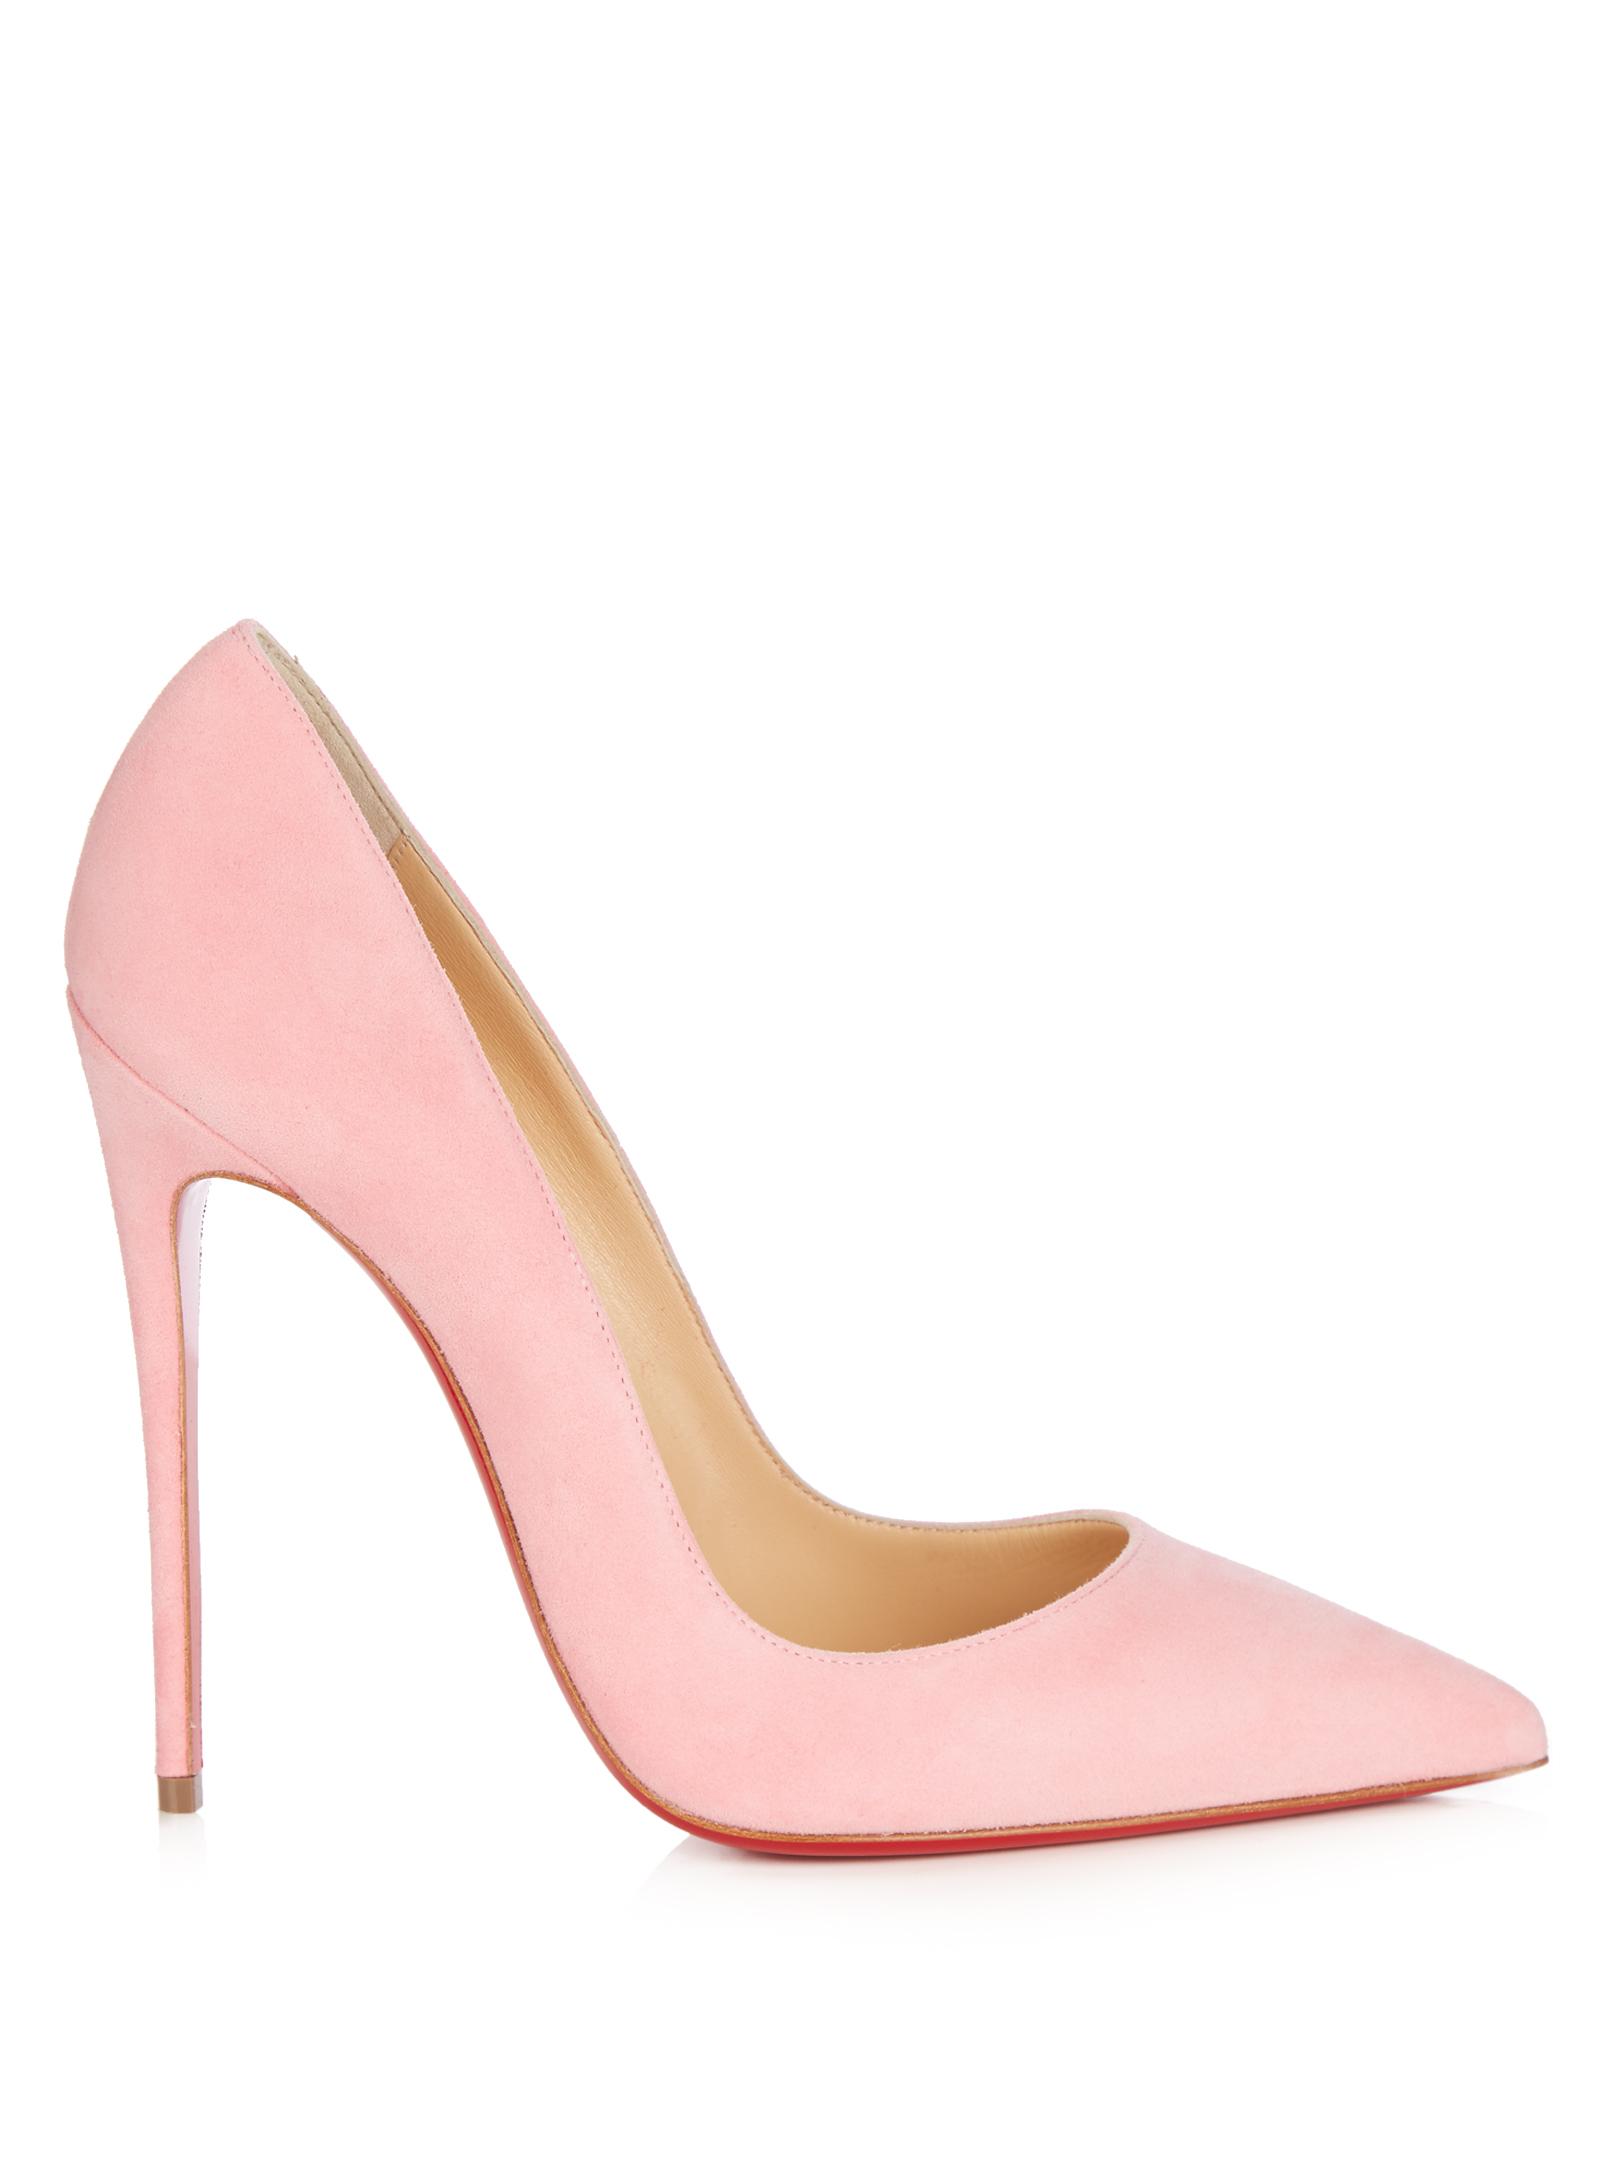 Christian Louboutin So Kate 120mm Pumps in Pink | Lyst